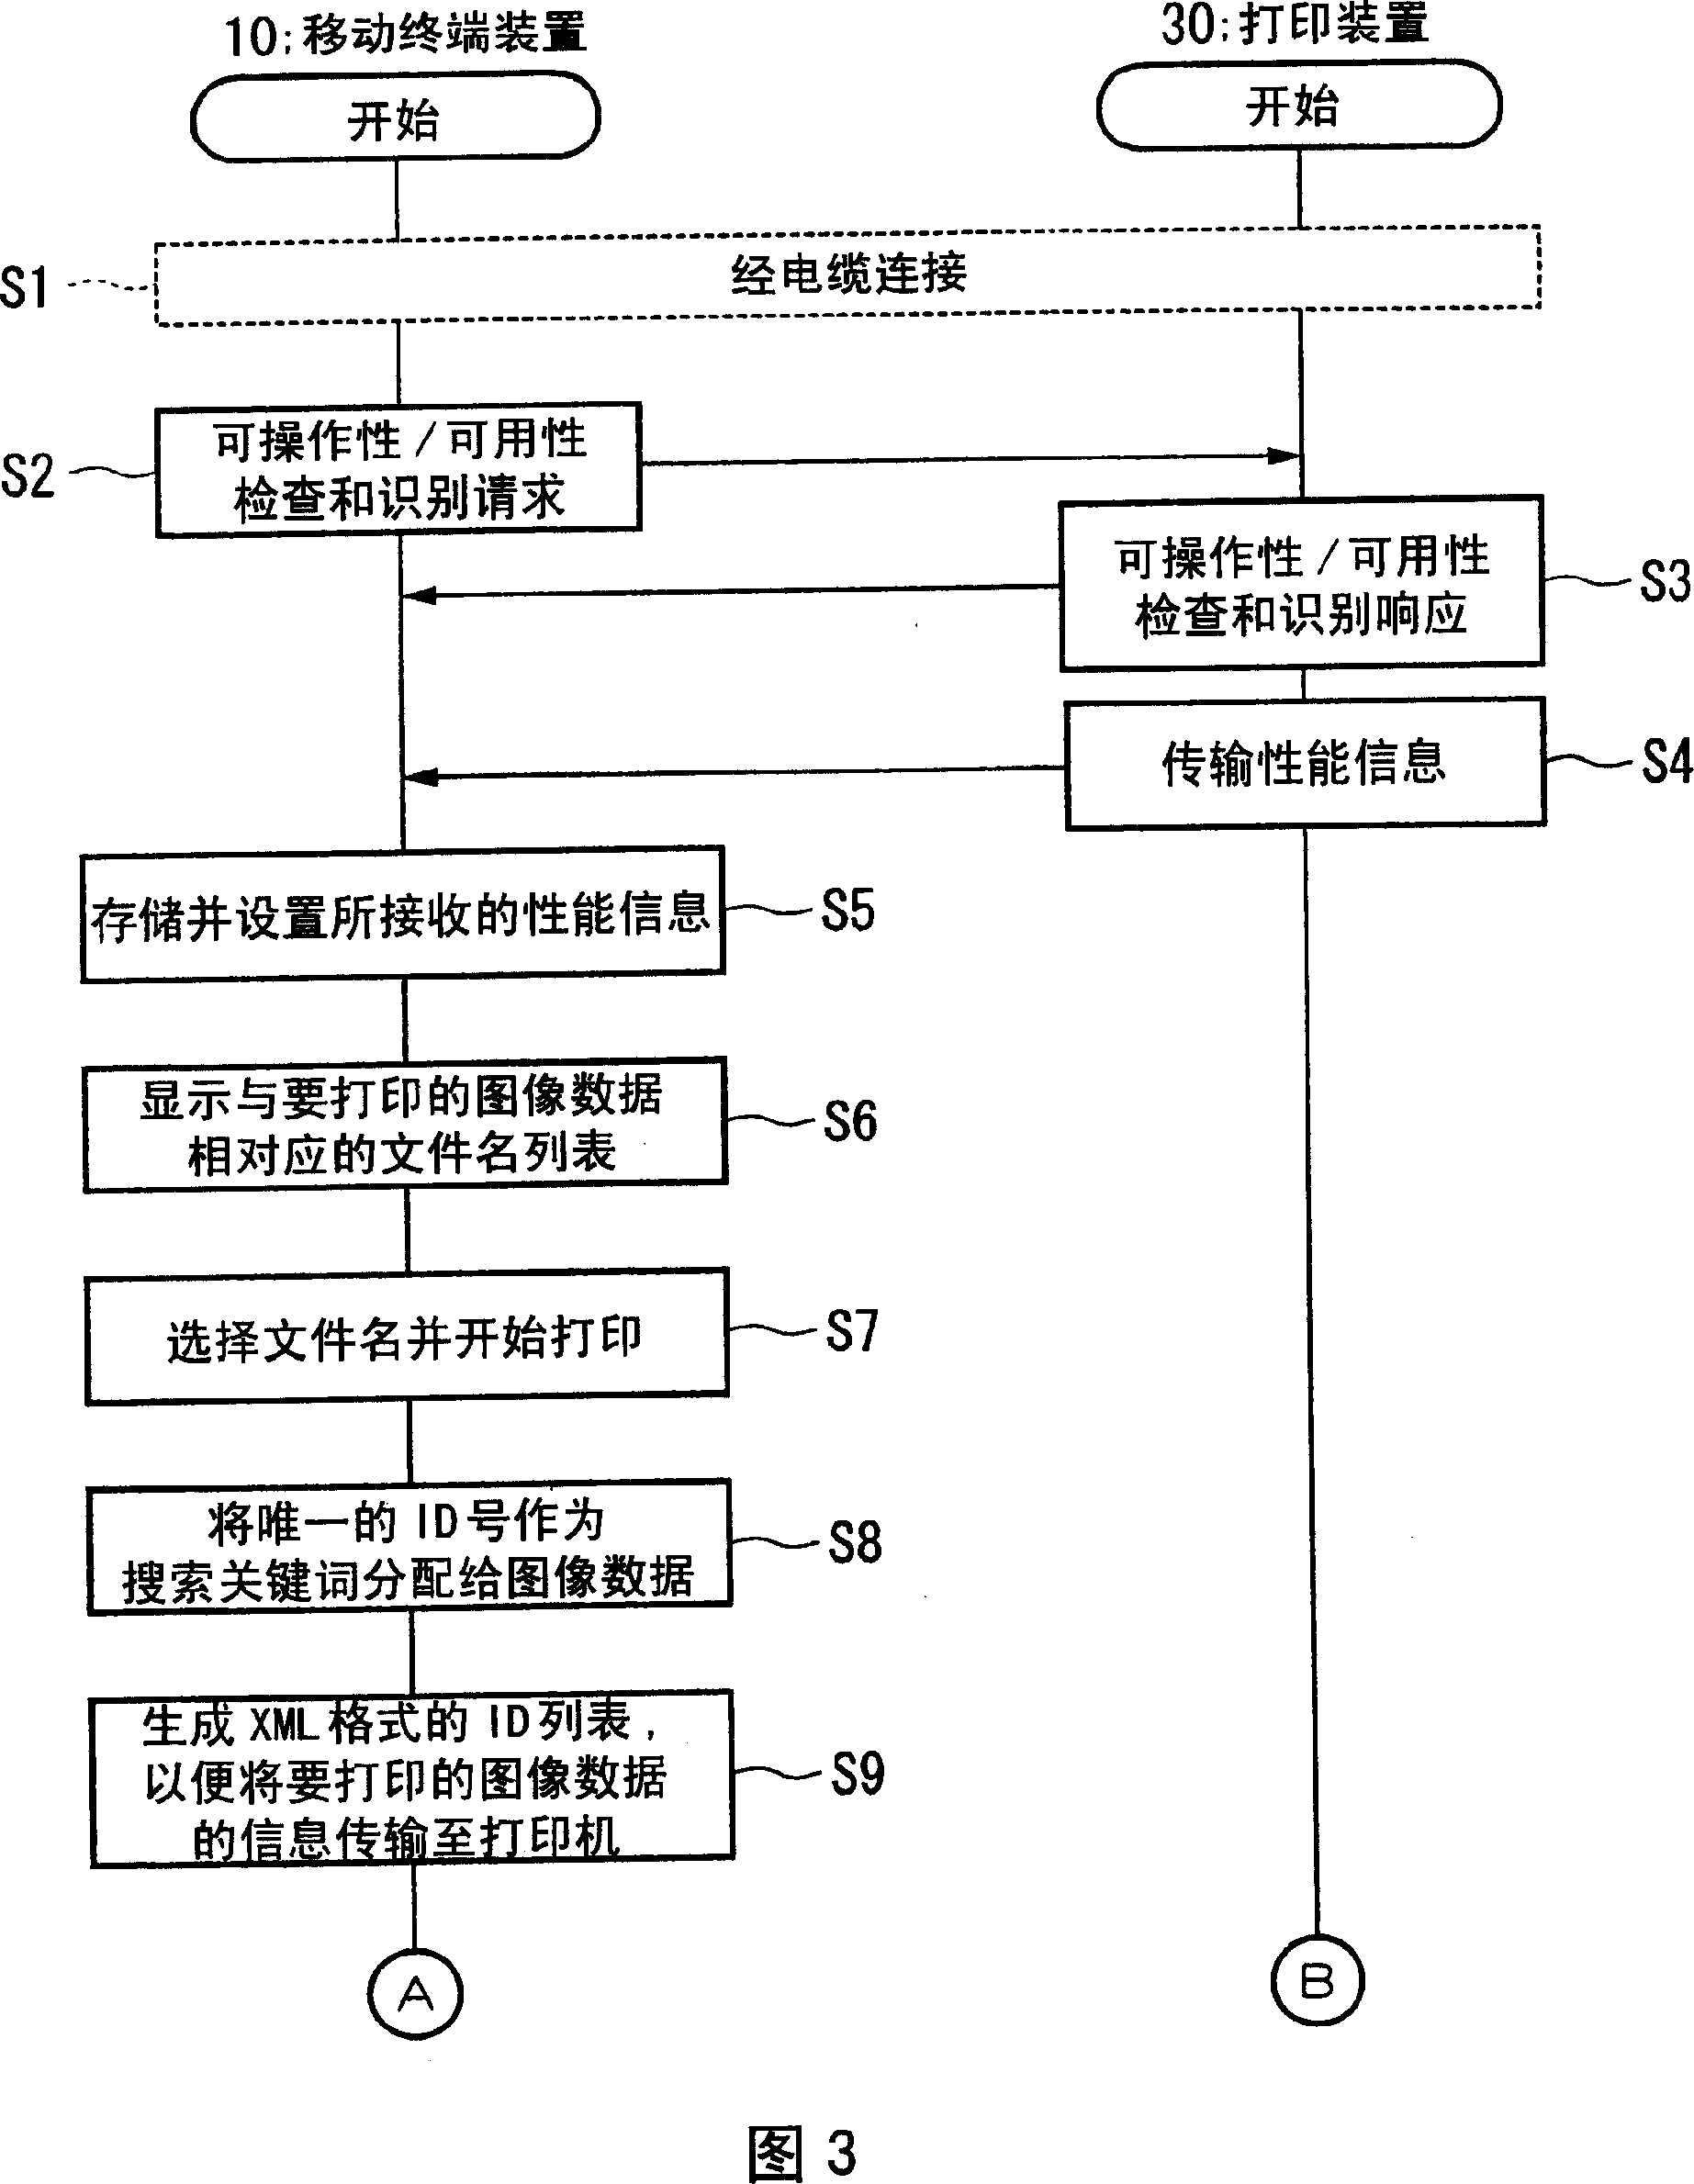 Mobile terminal apparatus, print system and print communication control method and computer program